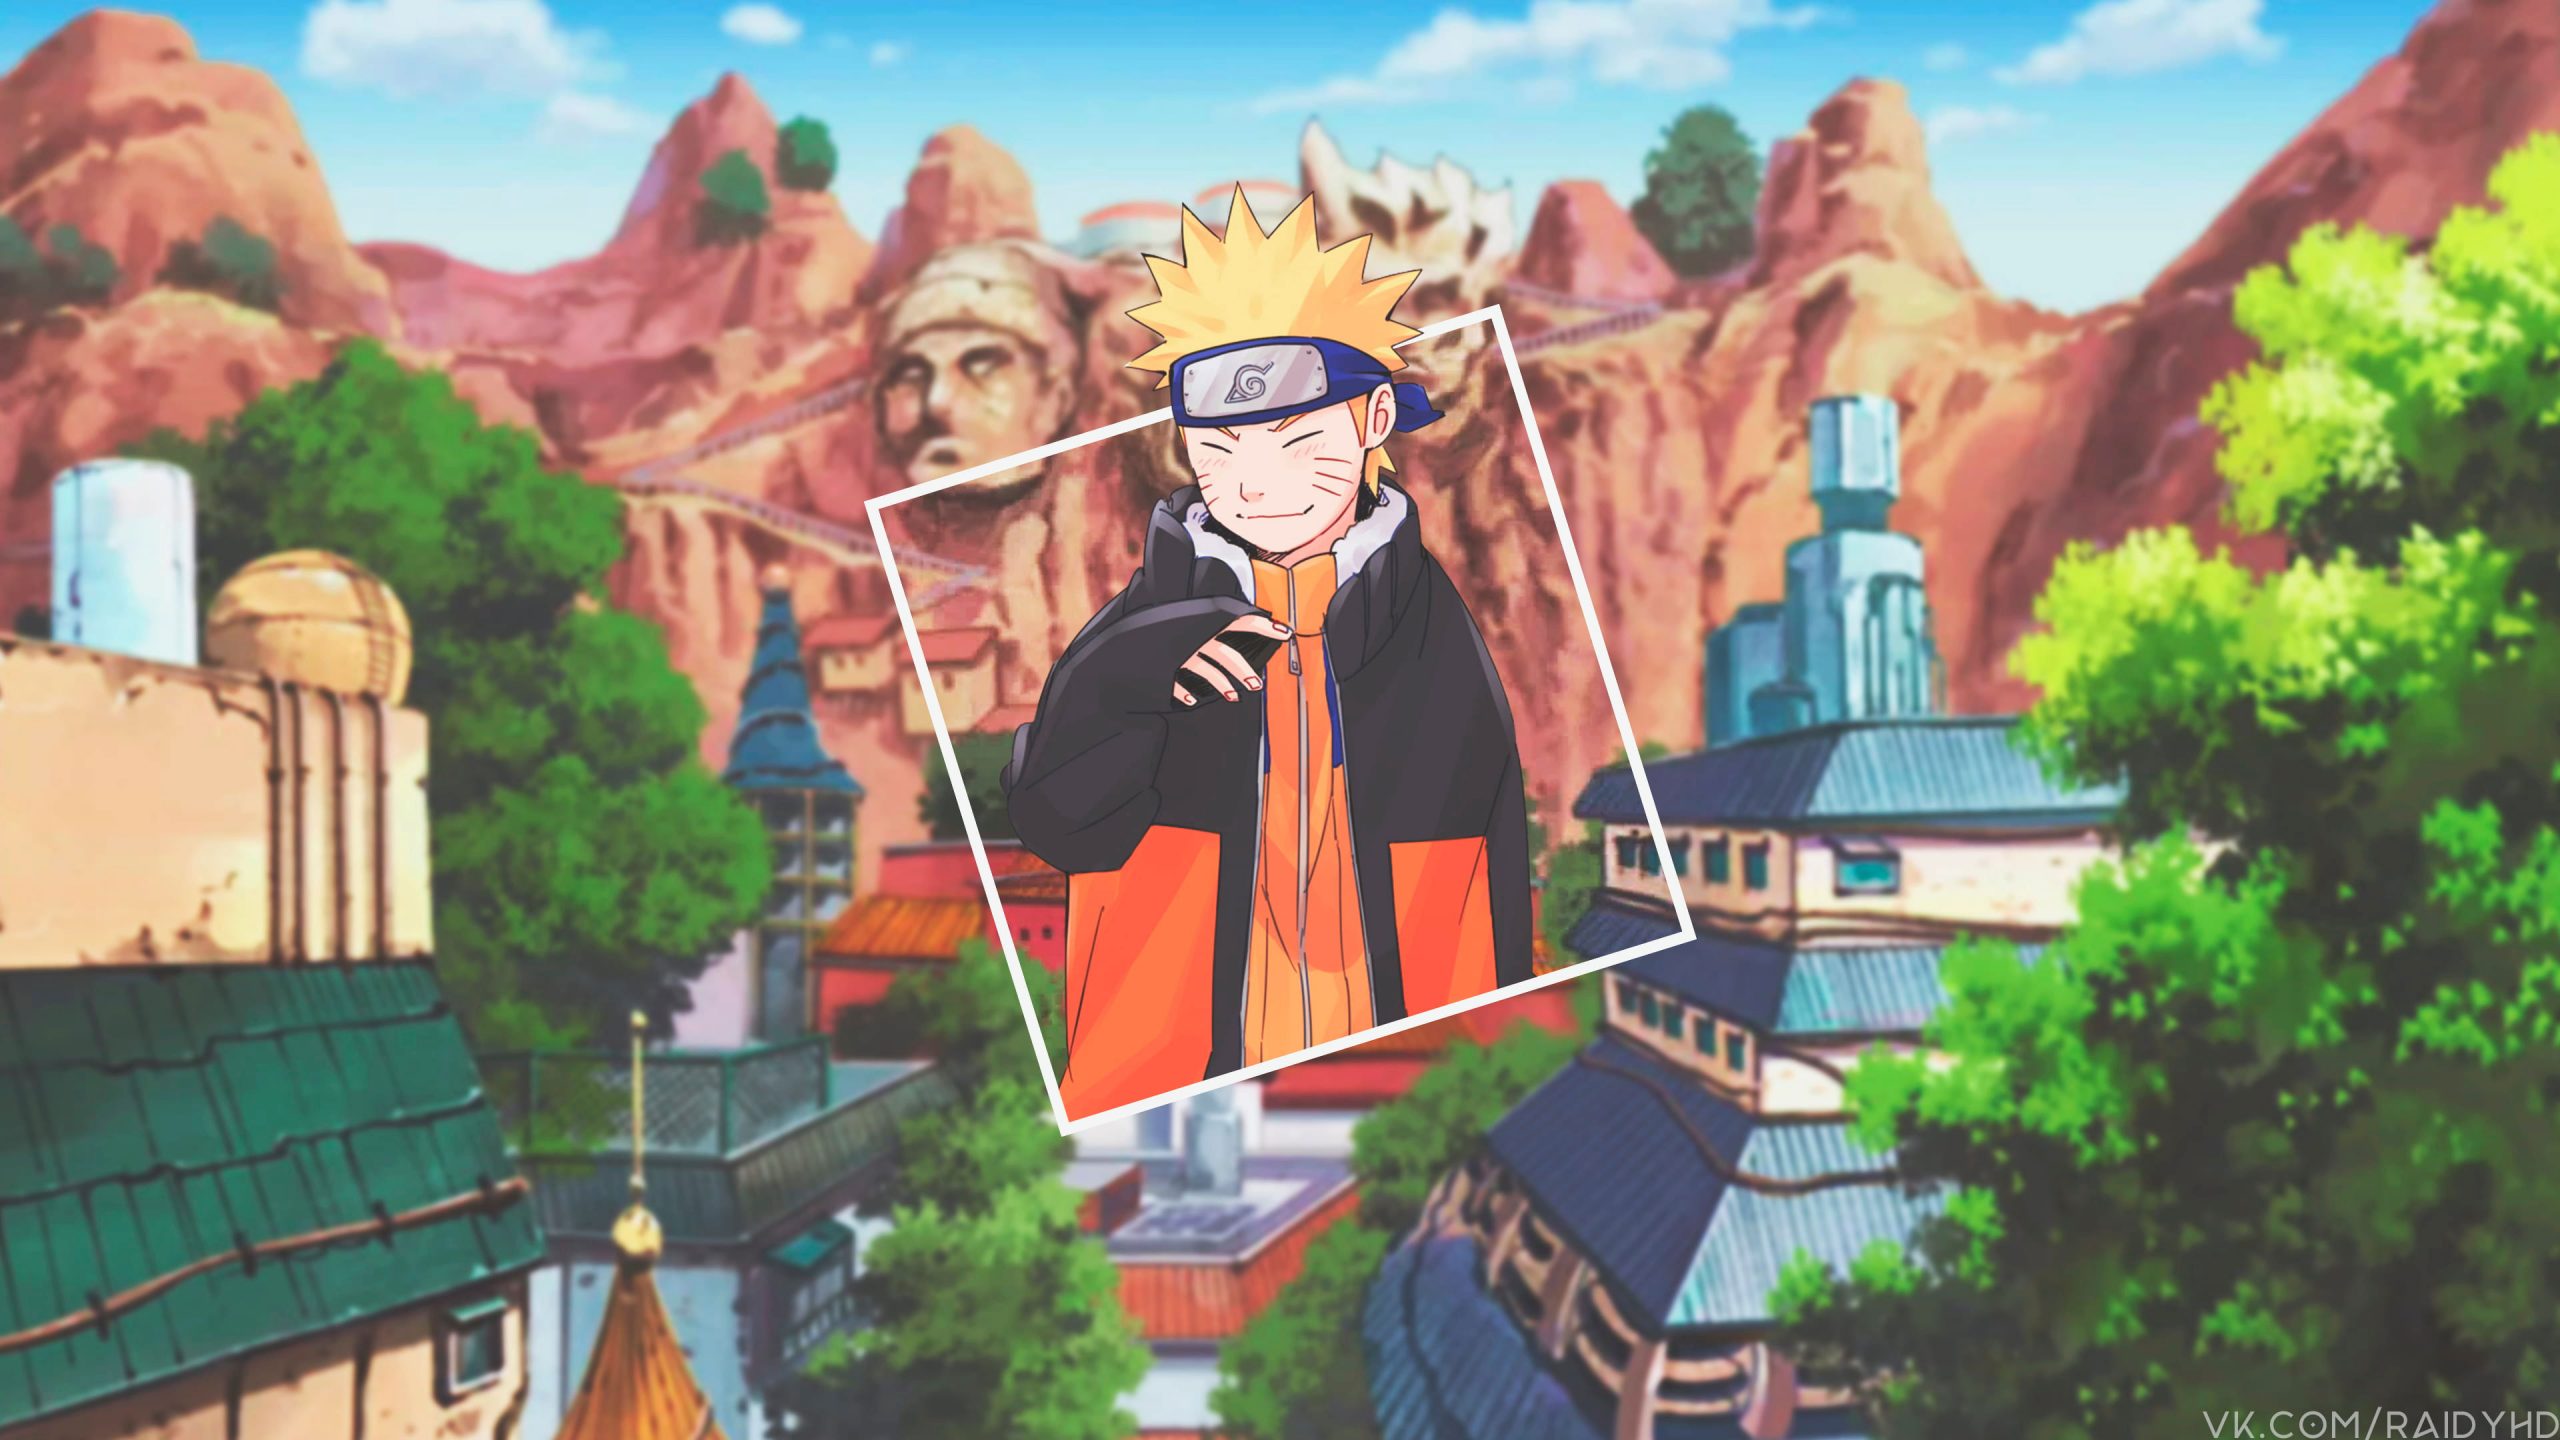 Wallpaper Nature Art Anime Boys, Picture In Picture, Naruto • Wallpaper For You HD Wallpaper For Desktop & Mobile